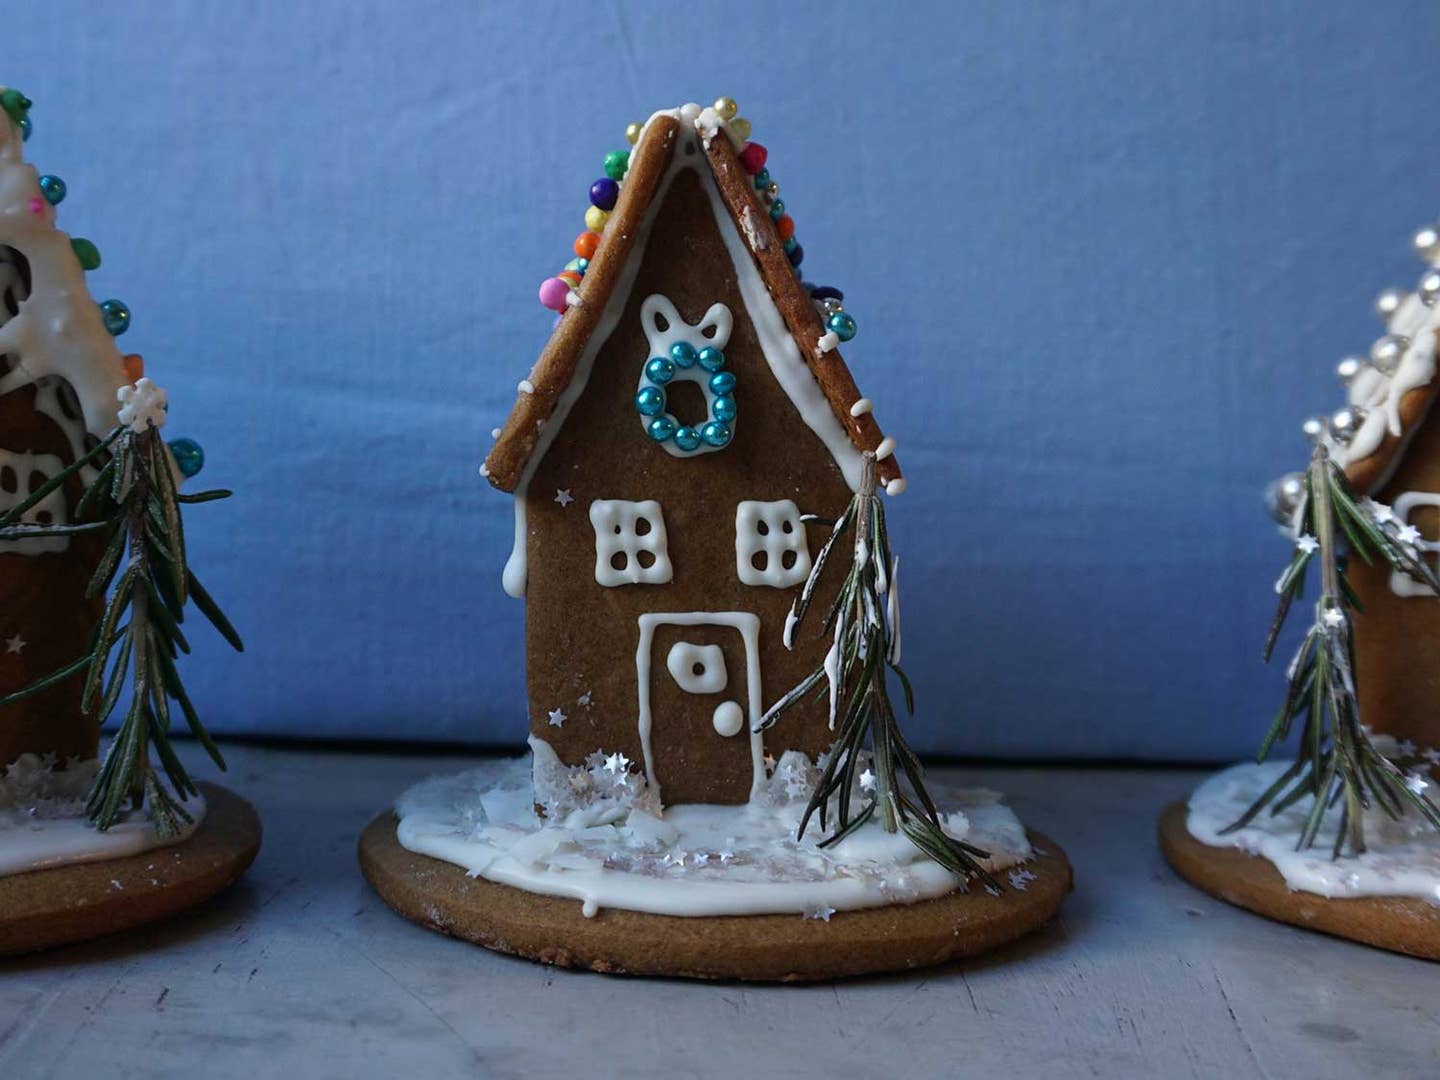 How to Build a Gingerbread House, From Dough to Decor